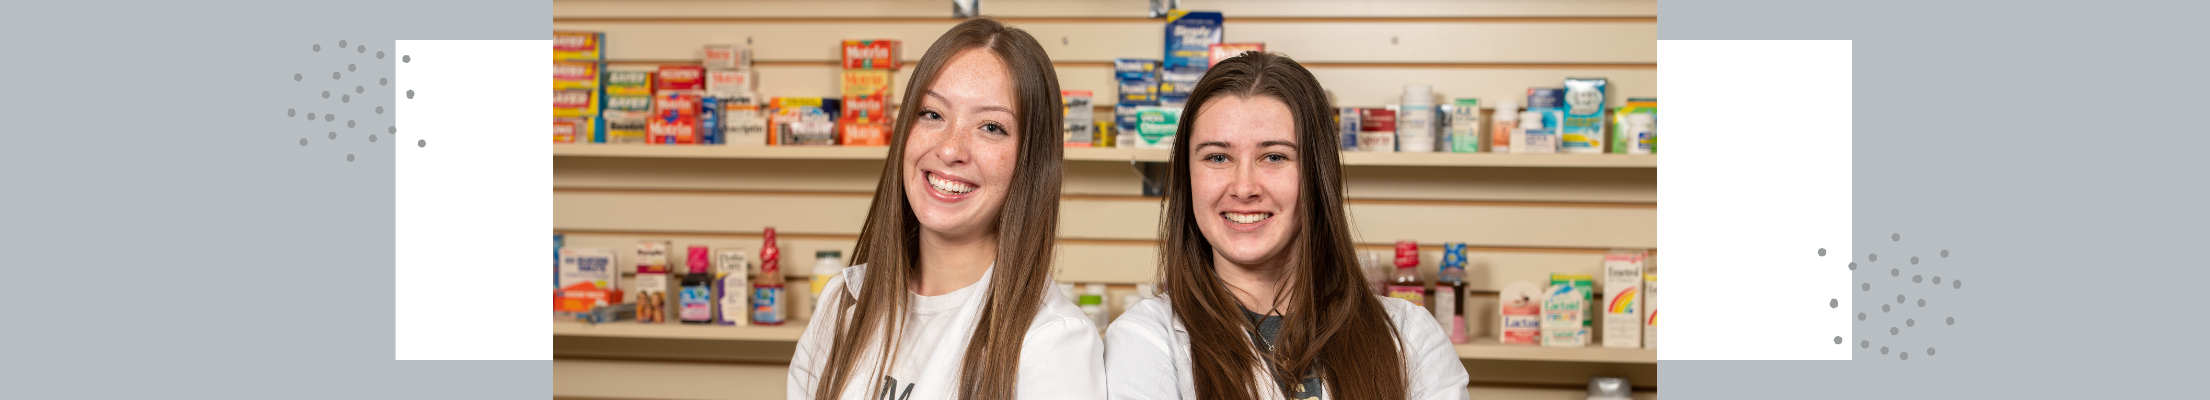 two pharmacy students in white coats